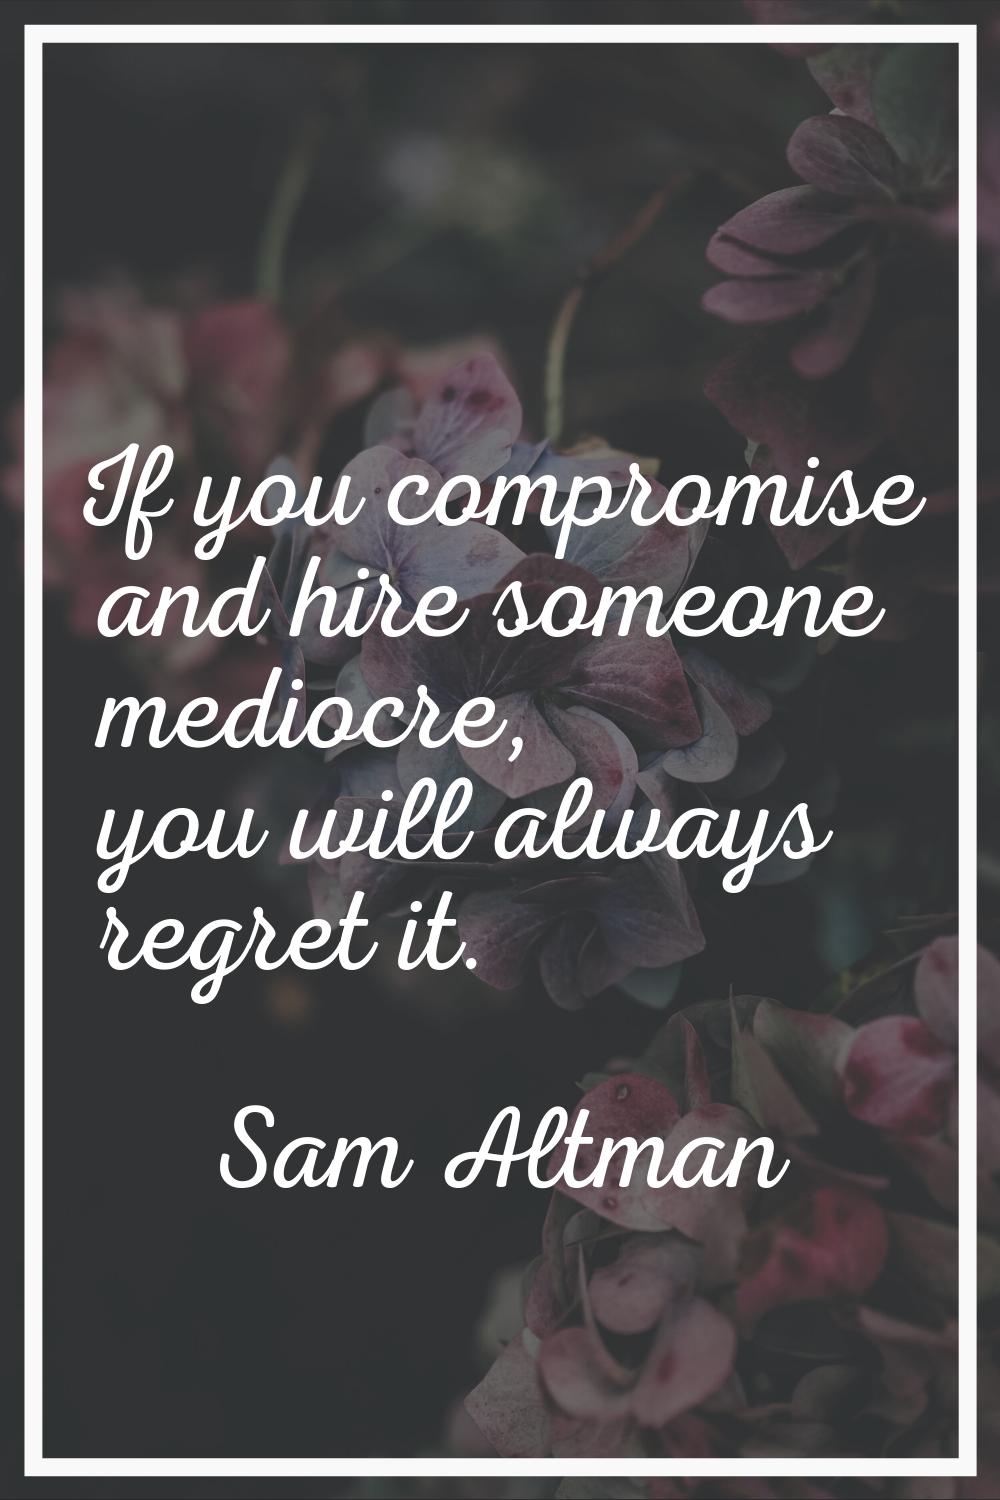 If you compromise and hire someone mediocre, you will always regret it.